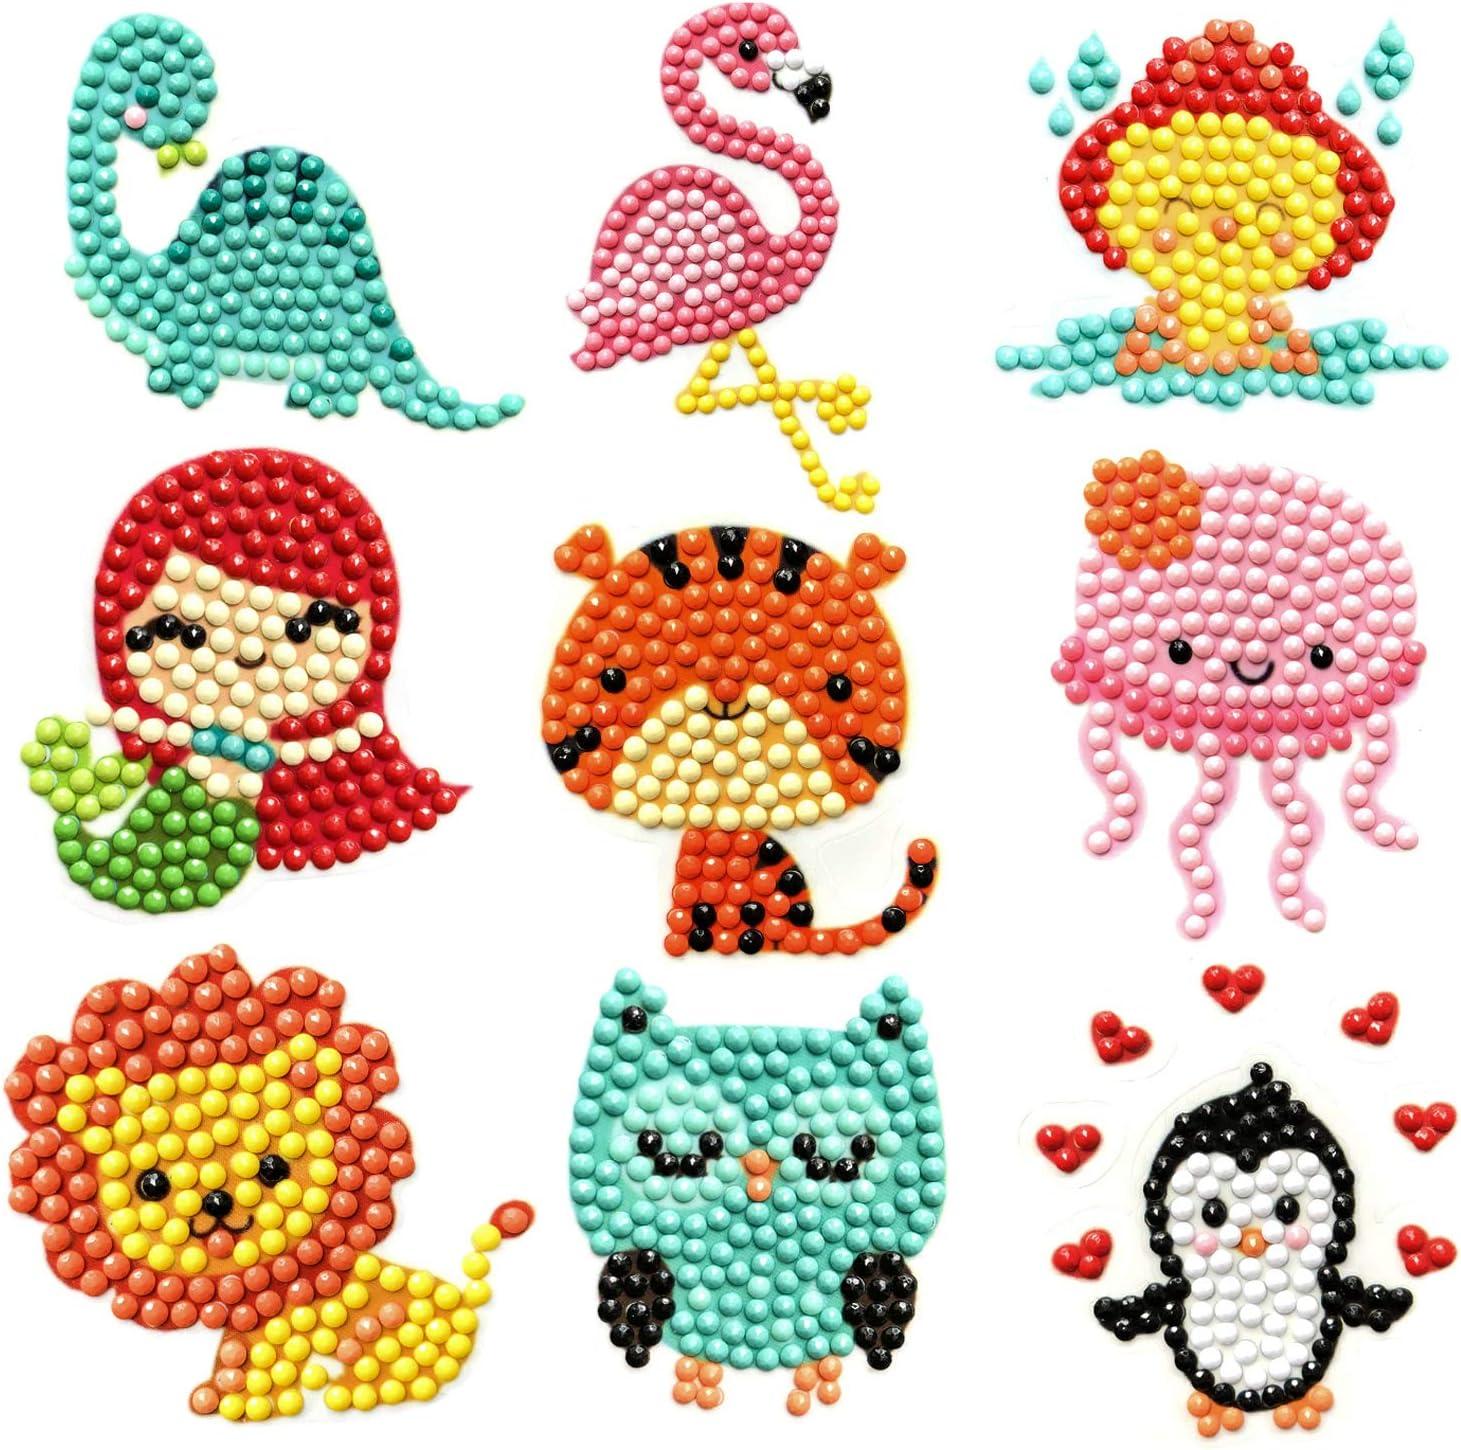 sinceroduct 64 PCS 5D DIY Diamond Painting Stickers Kits for Kids and Adult  Beginners Stick - Shaped Paint Marked with Diamonds by Numbers More Cute  Animals Dinosaurs Kids Gift